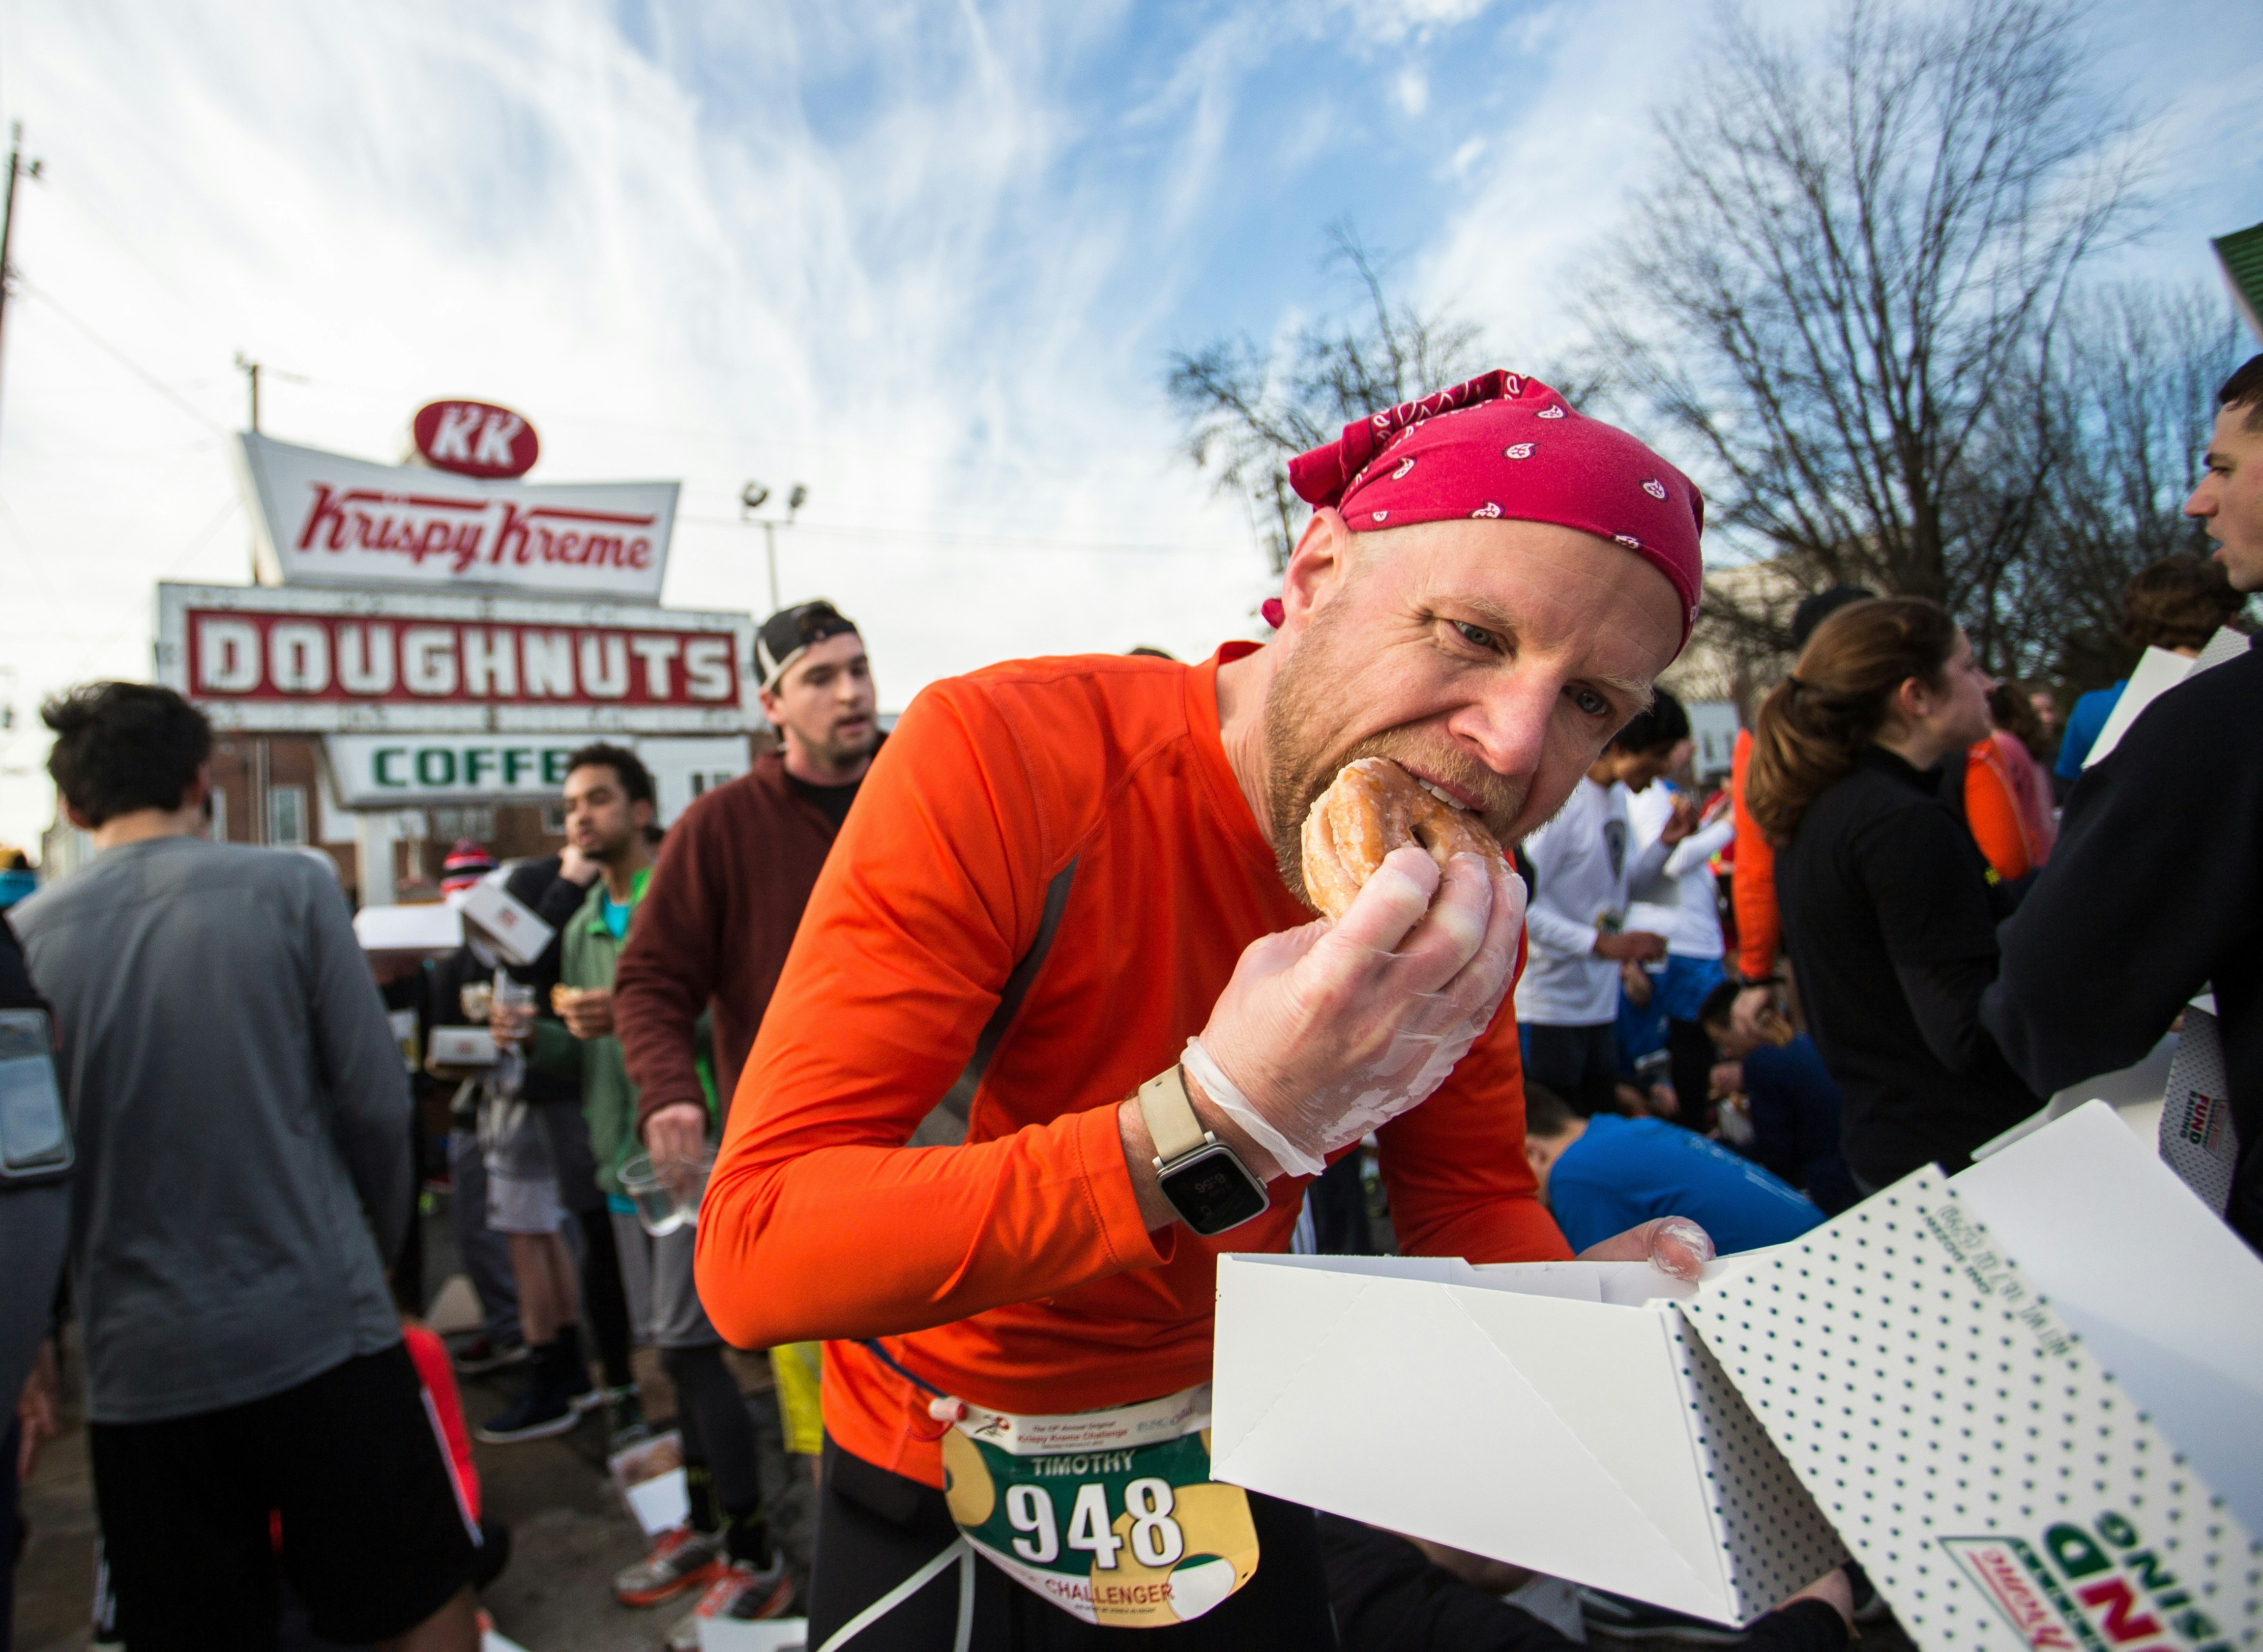 A man shoves a doughnut into his mouth during a run. In the background is a Krispy Kreme stand  